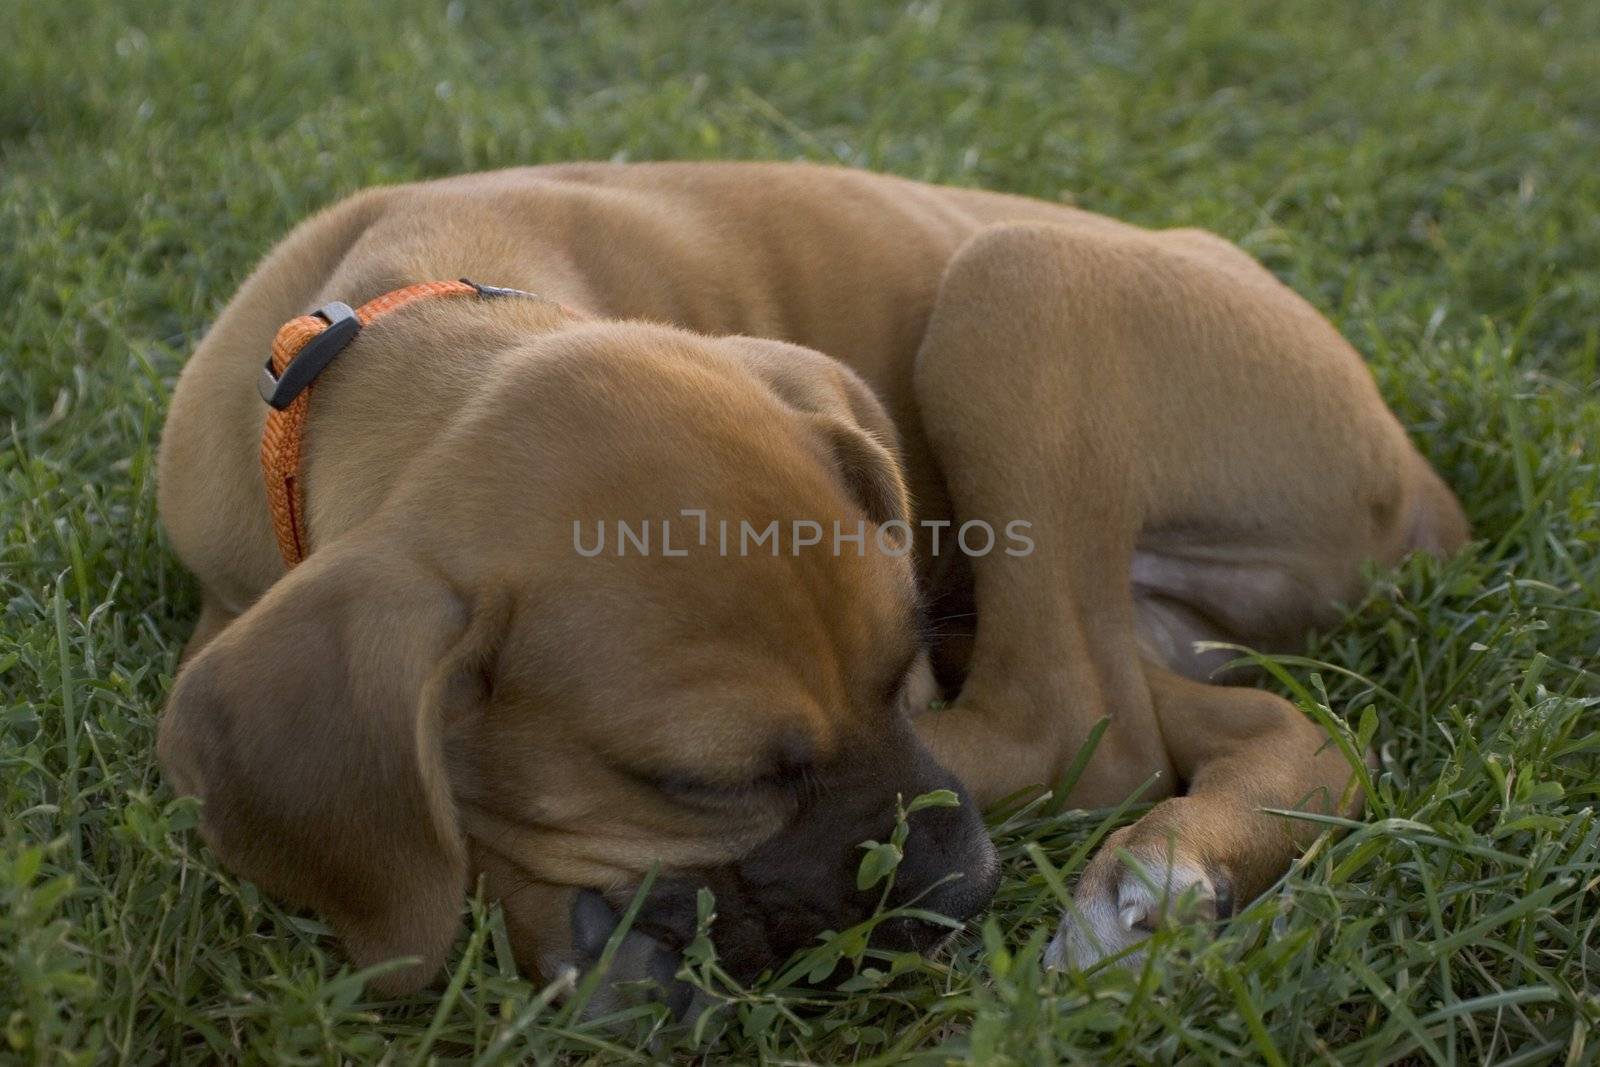 Emile, the baby boxer sleeping in the grass with bright orange collar